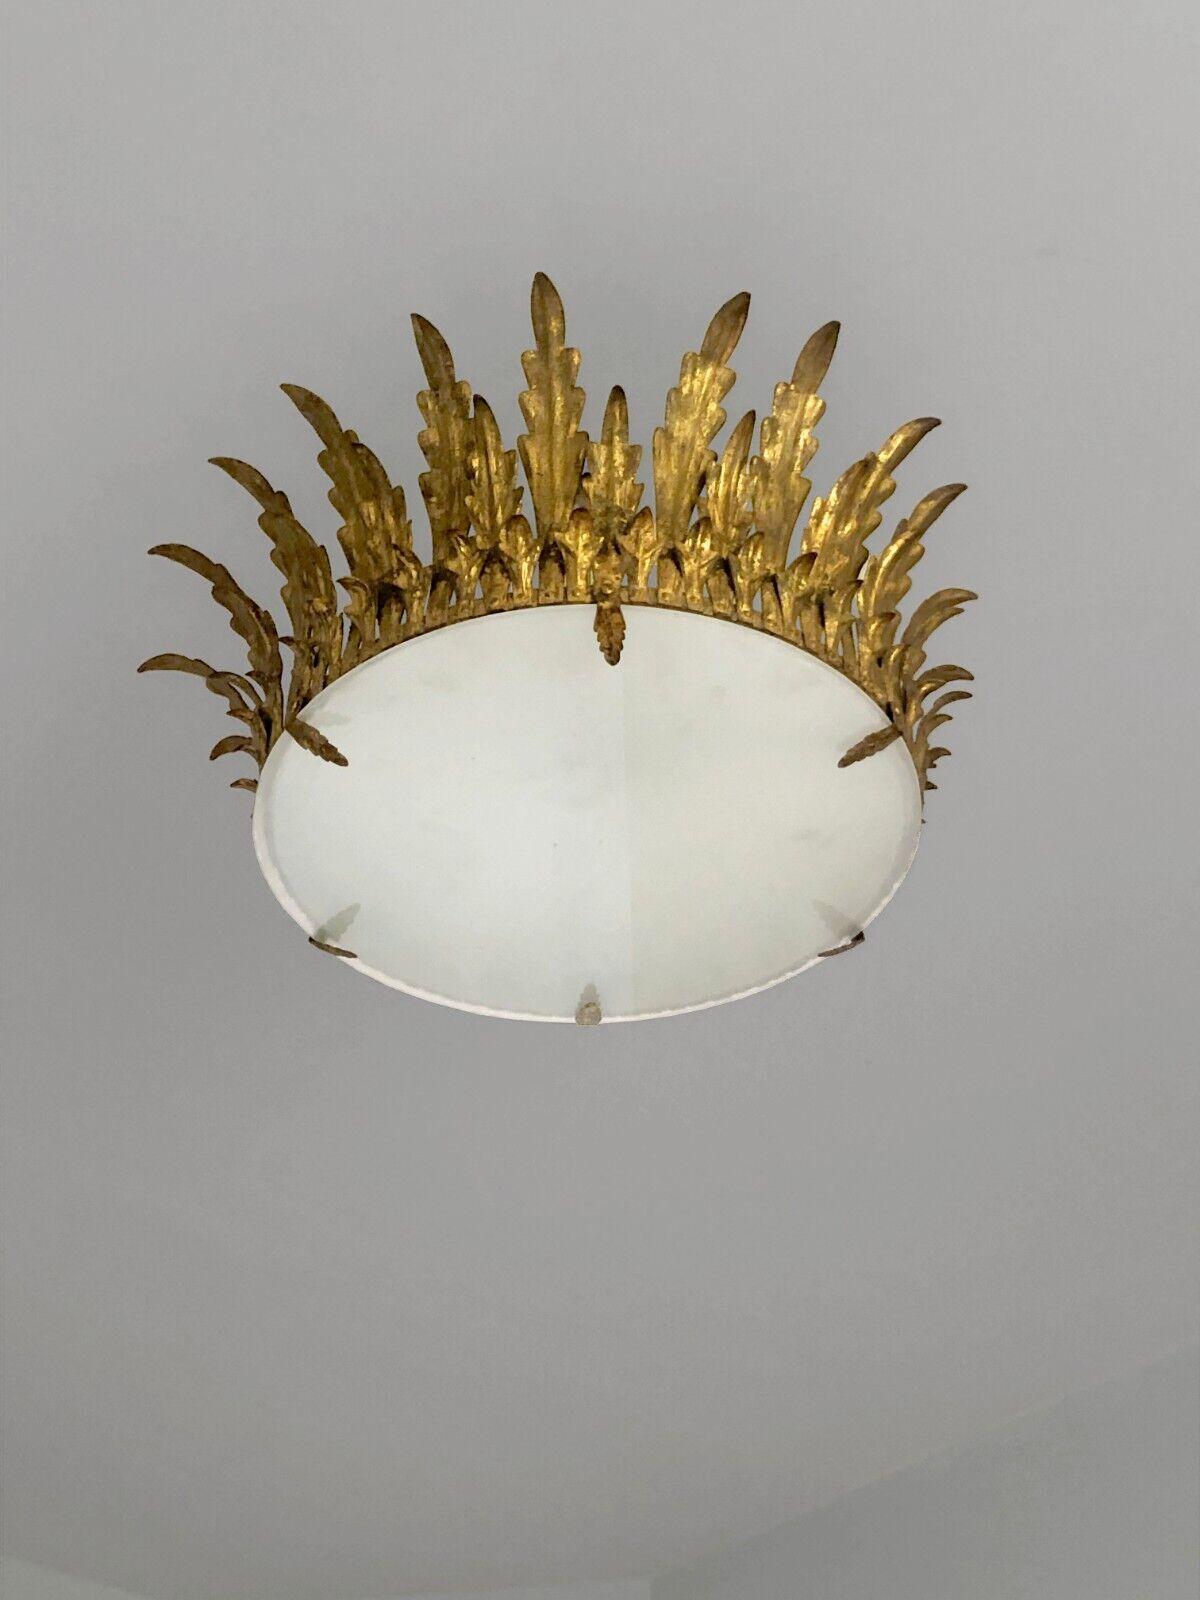 An elegant suspension, chandelier, ceiling light, circular in crown or sun, Art-Deco, Neo-Classical, Shabby-Chic, circular assembly of folded leaves in patinated golden brass forming a small crown, circular diffuser in sandblasted glass, Maison